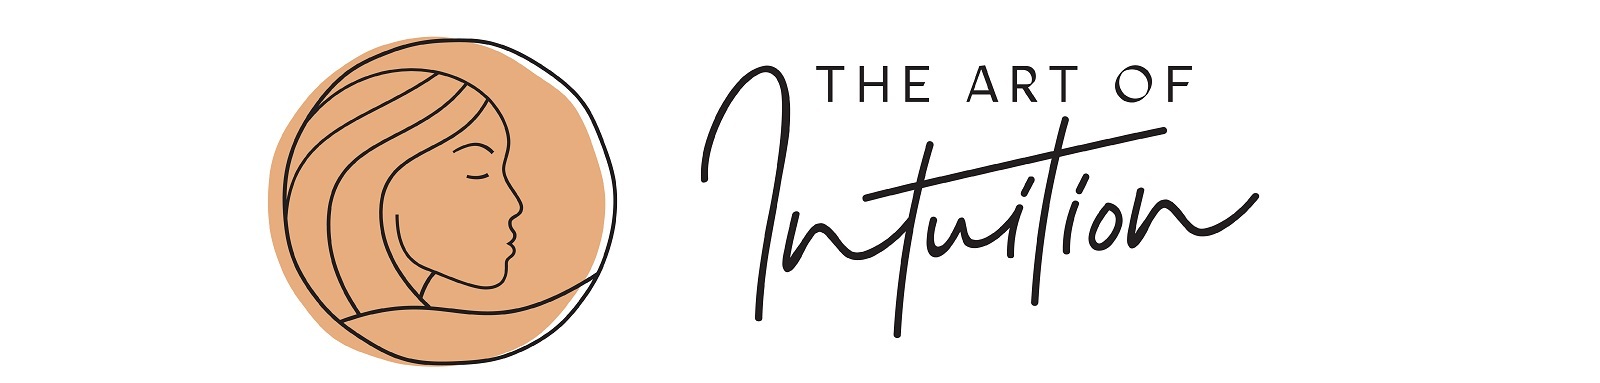 The Art of Intuition Show